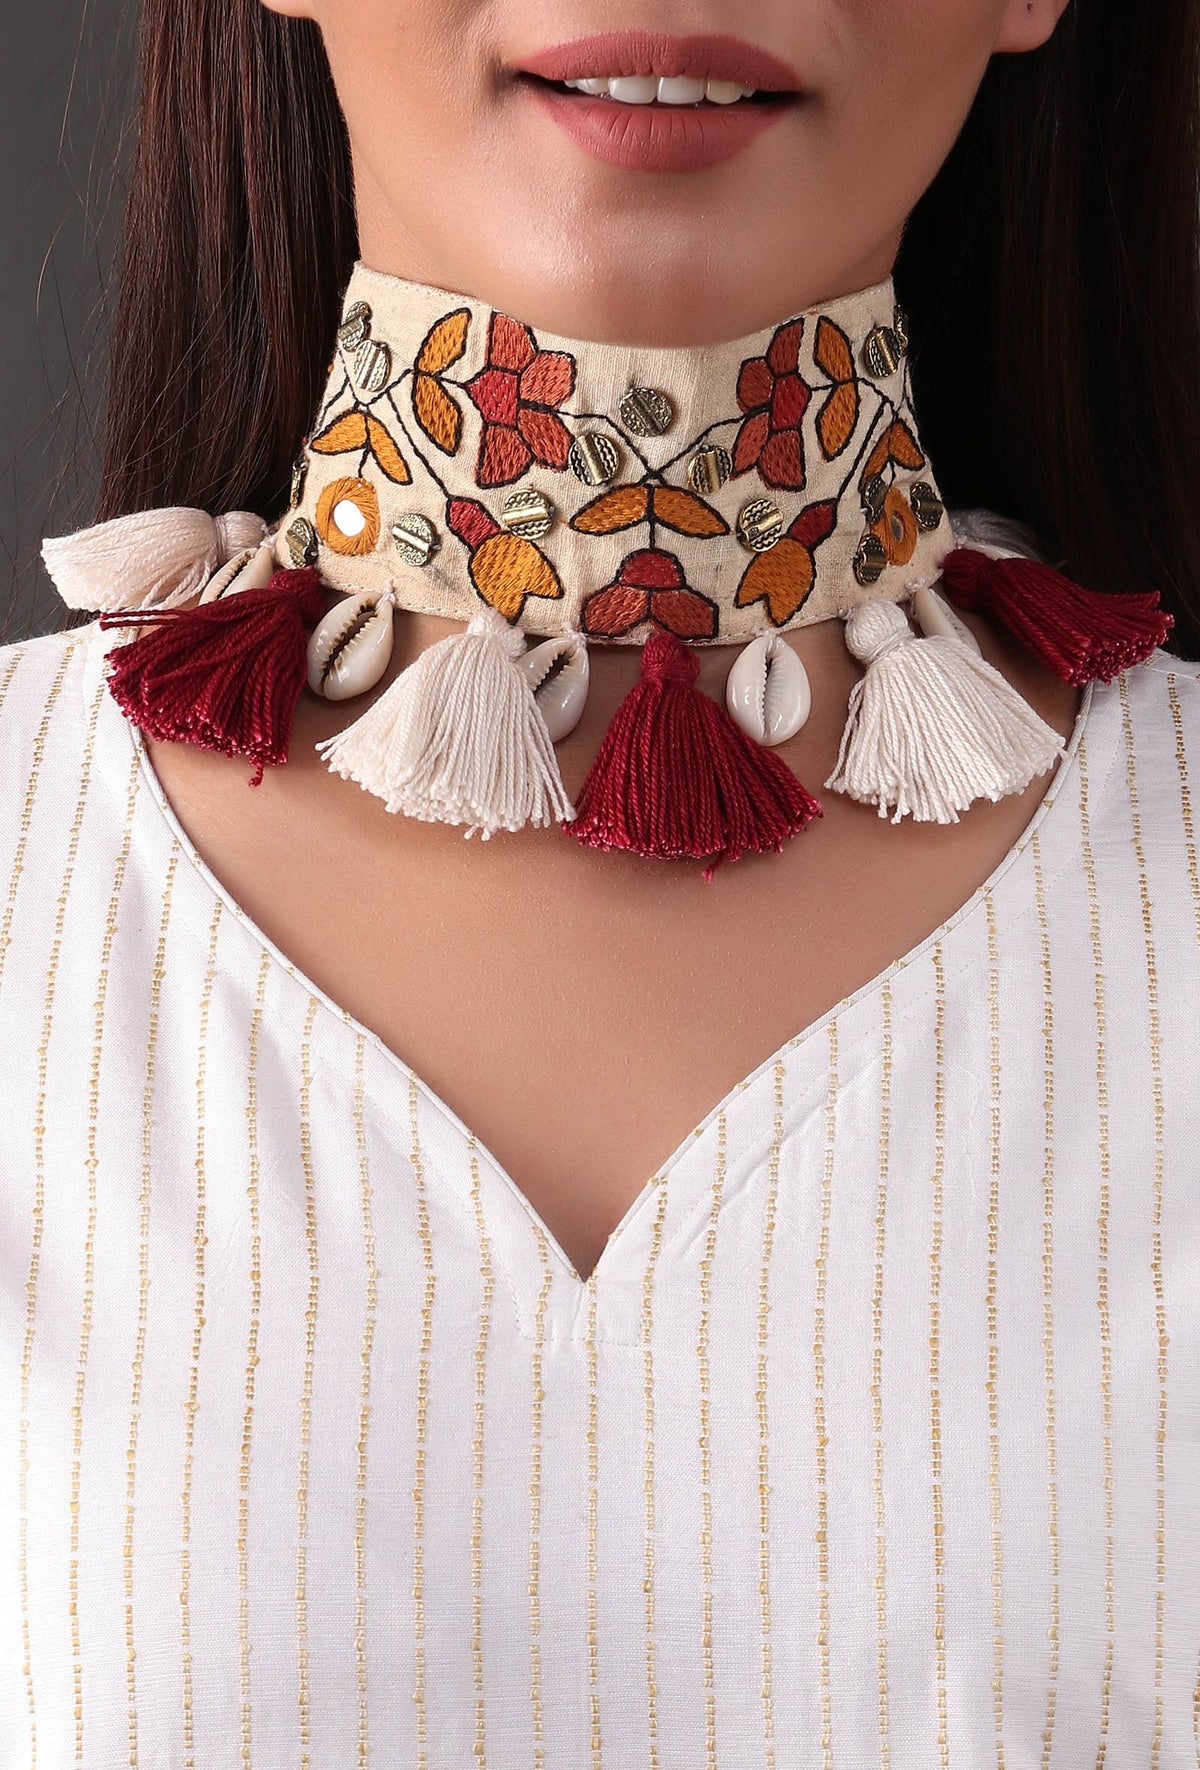 Red and White Kutch Embroidery Choker